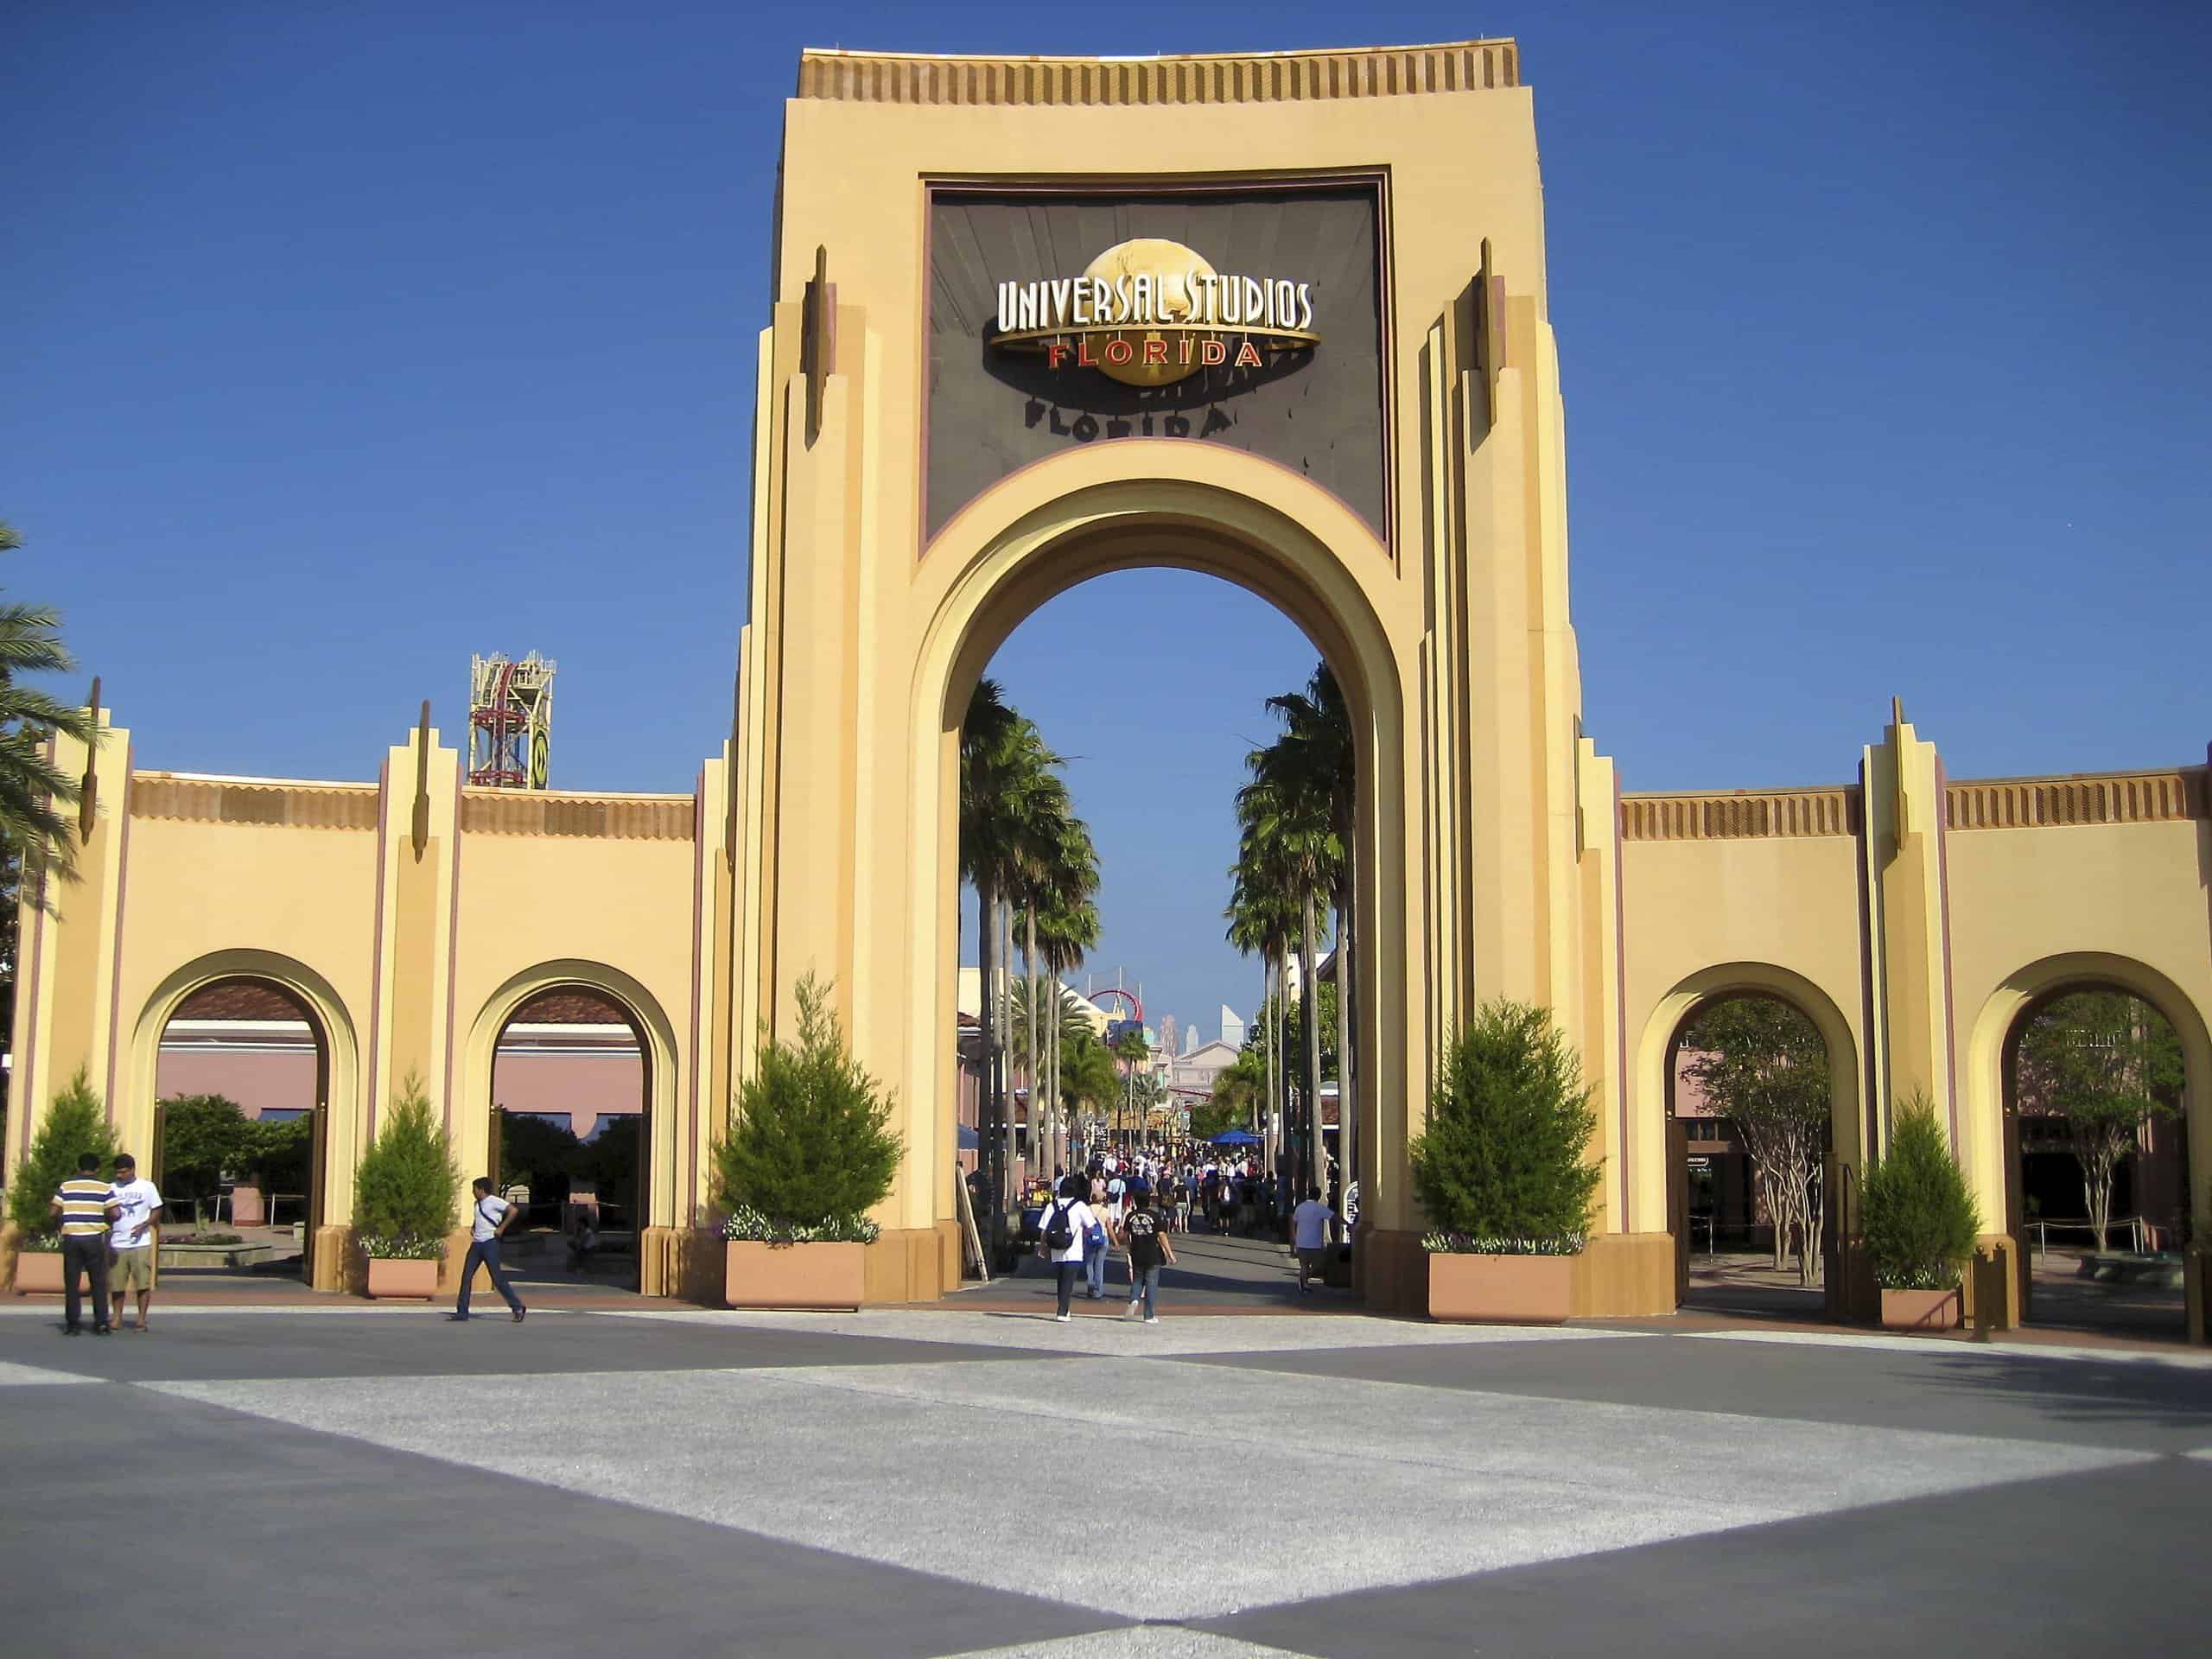 <p>With 2022 attendance hitting a four-year high of 10.75 million people, Universal Studios Florida is a major attraction. First opened to the world on June 7, 1990, the park is owned and operated by NBCUniversal. Along with its multiple rides, the park also includes a sister park next door and CityWalk, an outdoor entertainment and dining area. </p><p><span>Would you please let us know what you think about our content? <p>Agree? Tell us by clicking the “Thumbs Up” button above.</p> Disagree? Leave a comment telling us what you’d change.</span></p>